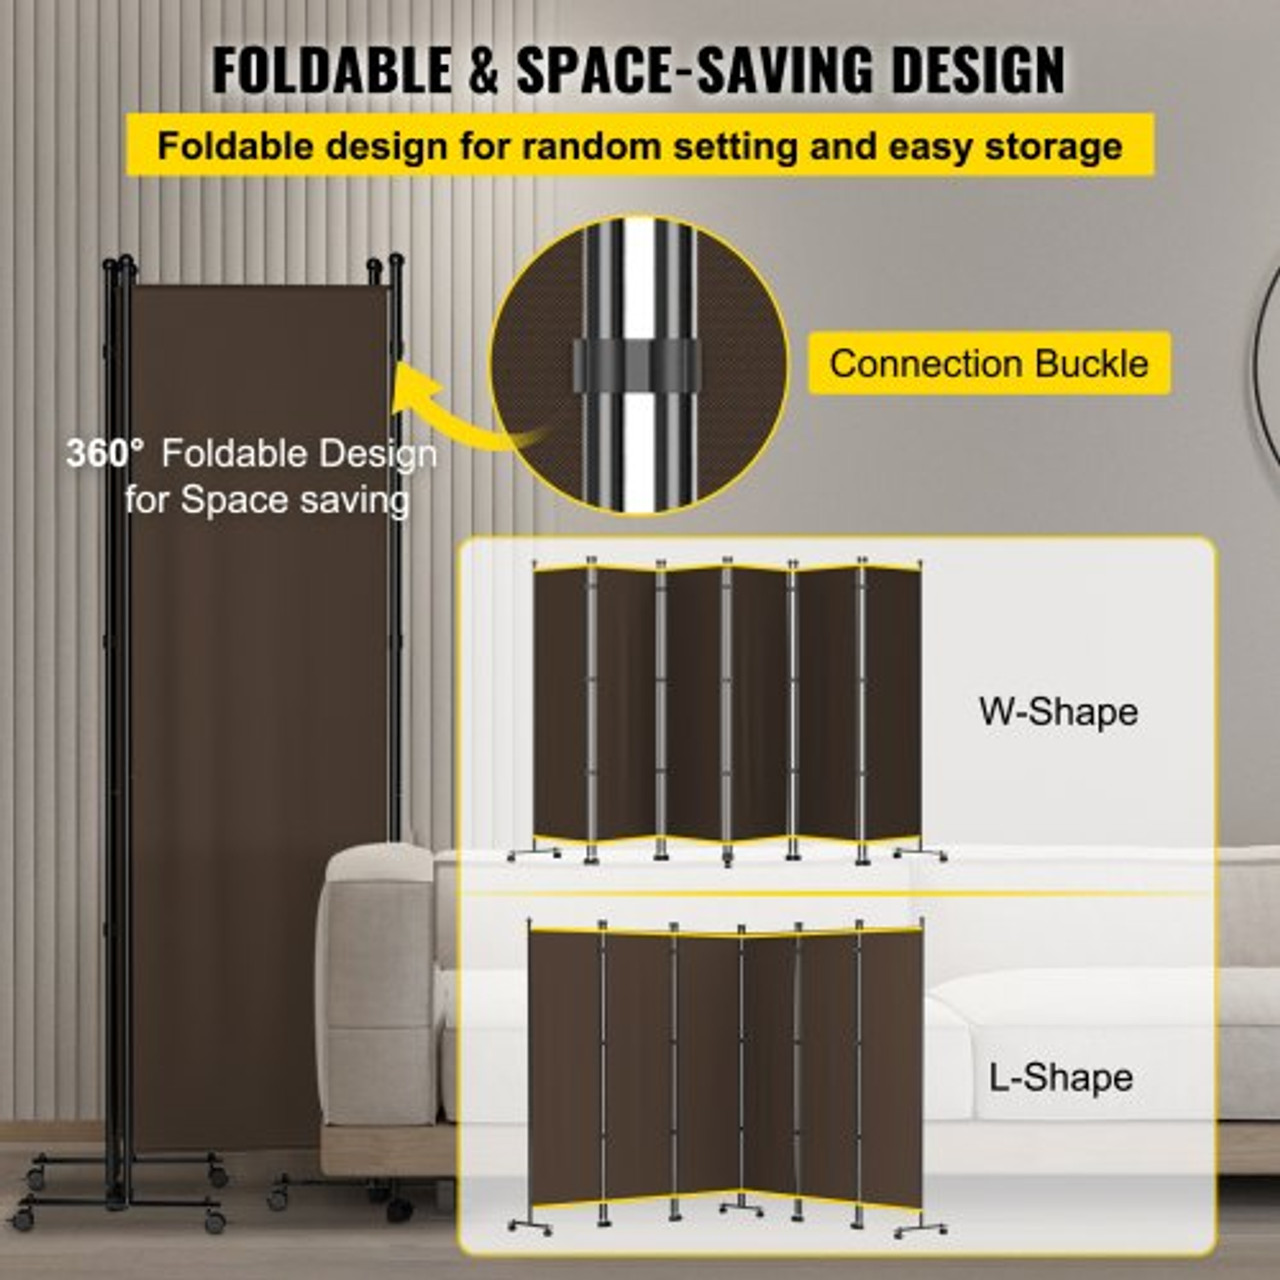 6 Panel Room Divider, 6 FT Tall, Freestanding & Folding Privacy Screen w/ Swivel Casters & Aluminum Alloy Frame, Oxford Bag Included, Room Partition for Office Home, 121" W x 14" D x 73"H, Brown